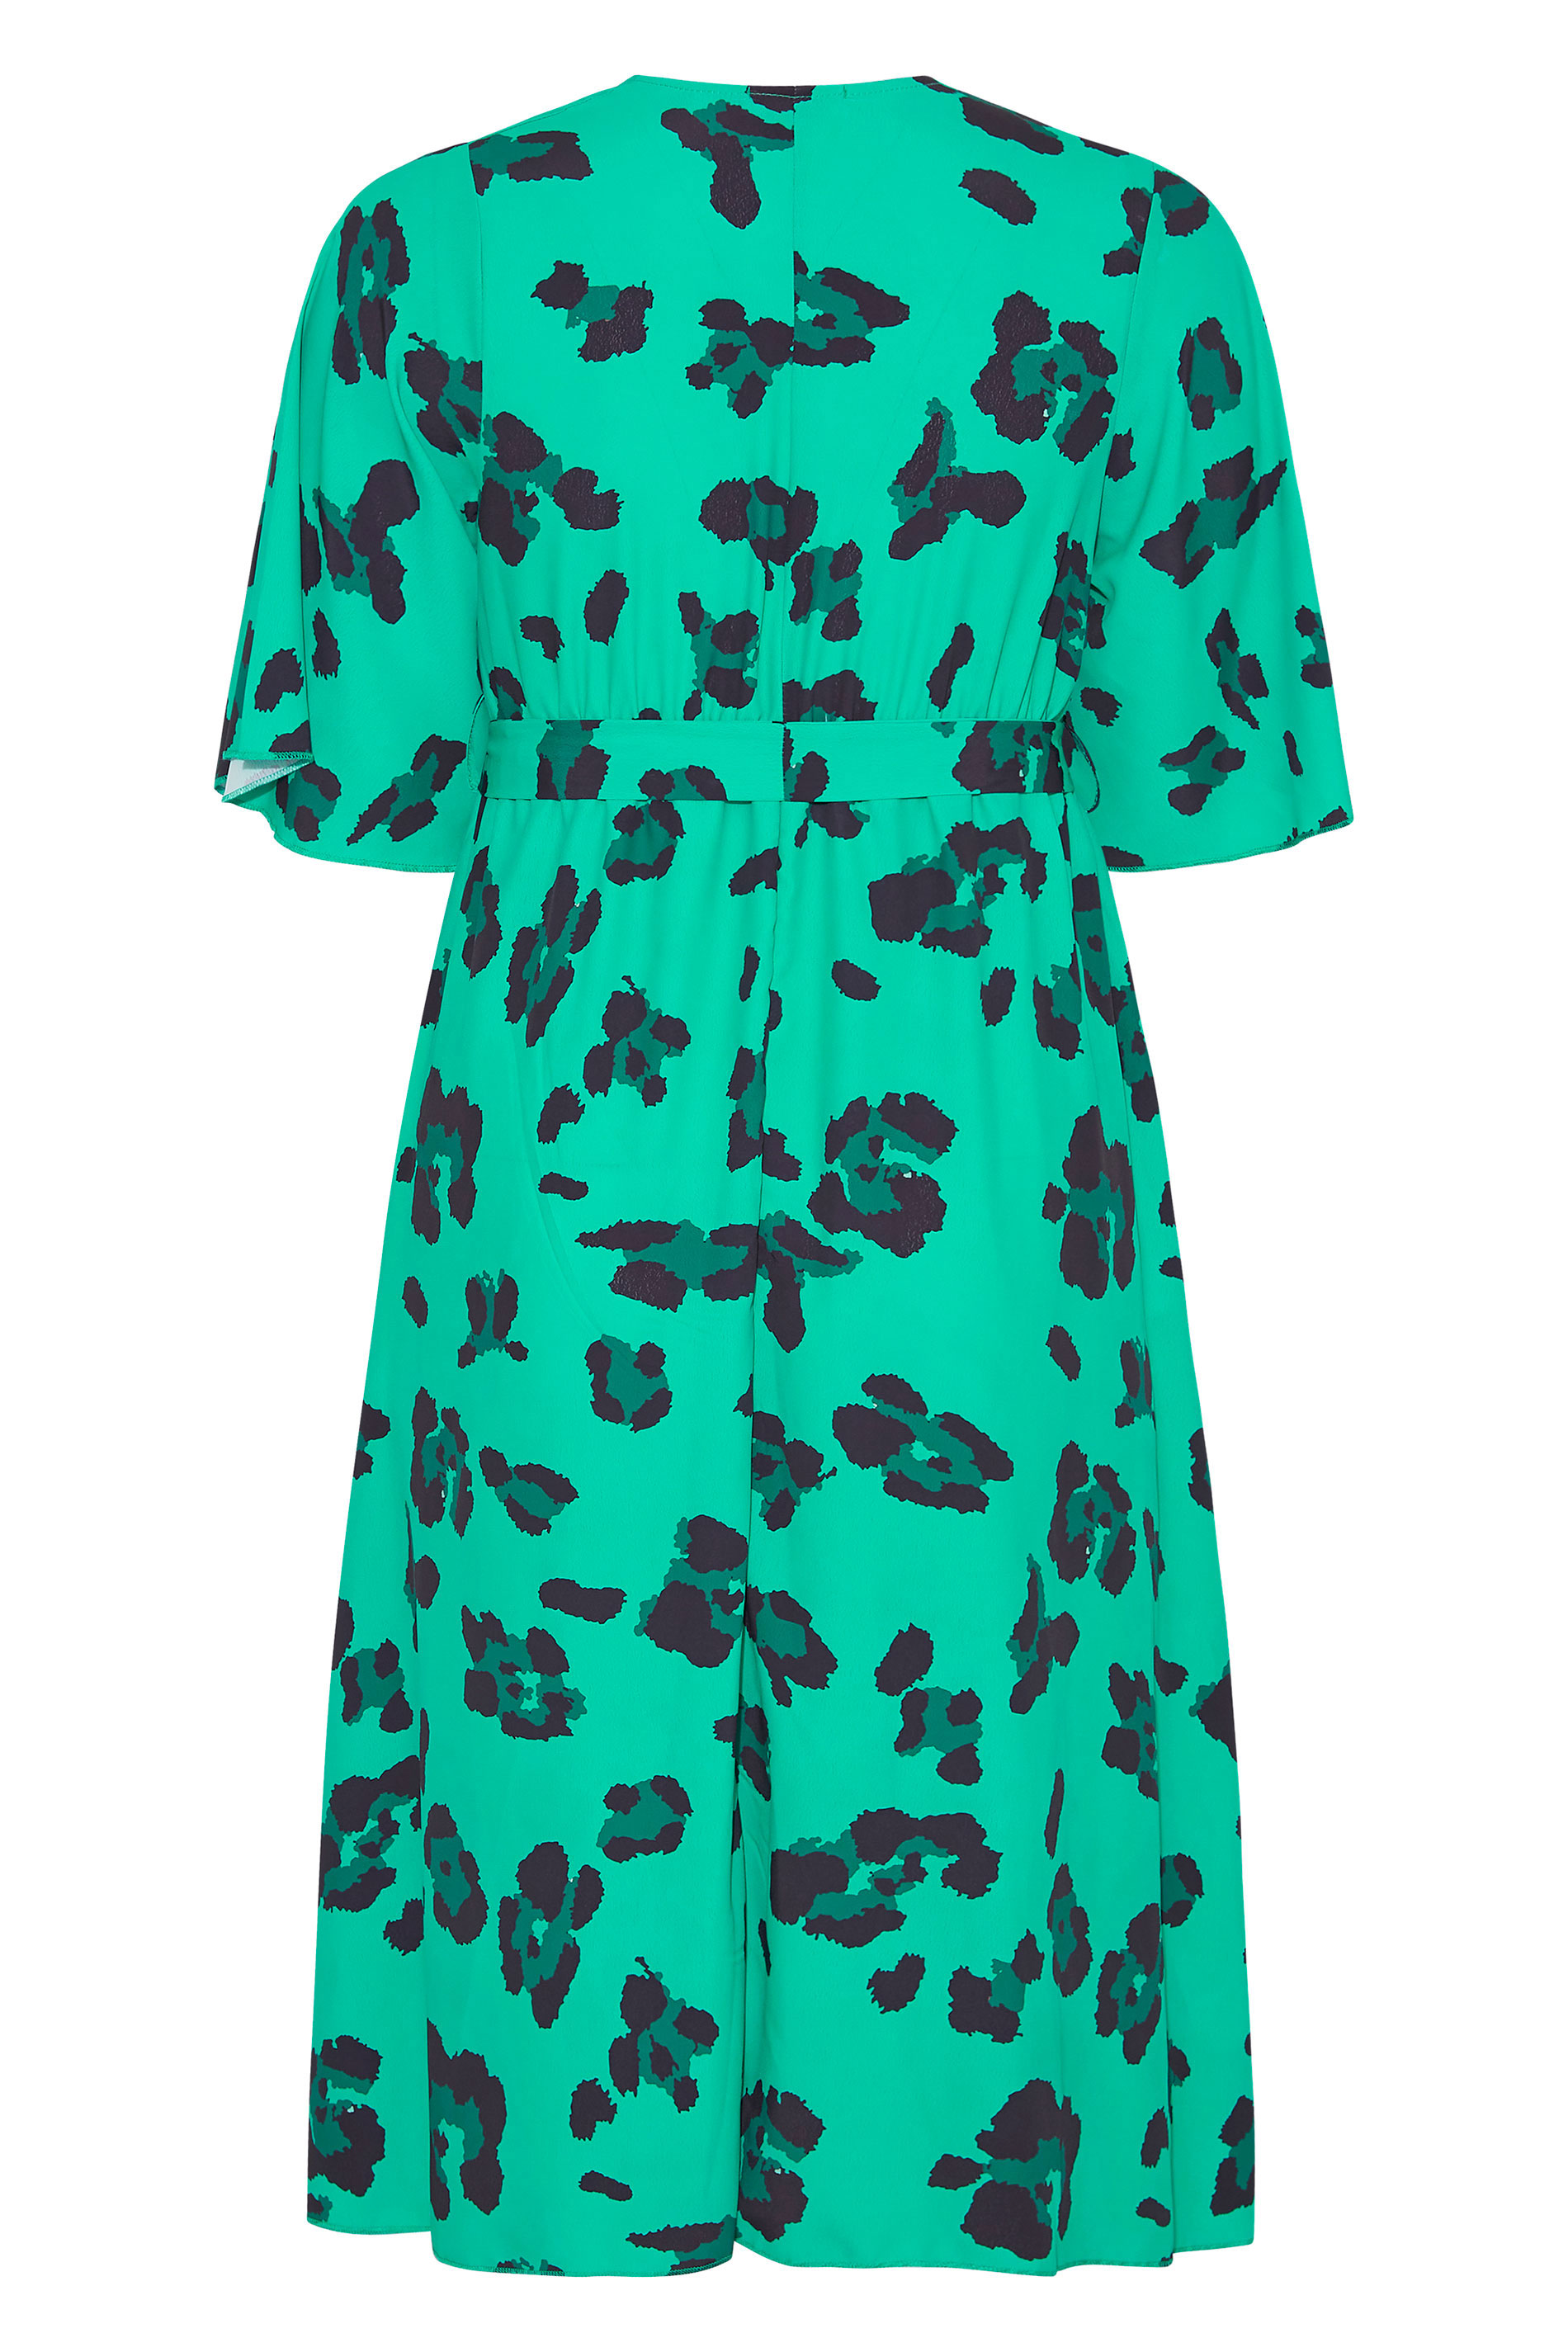 Robes Grande Taille Grande taille  Robes Portefeuilles | YOURS LONDON - Robe Verte Léopard Style Portefeuille - XL89952